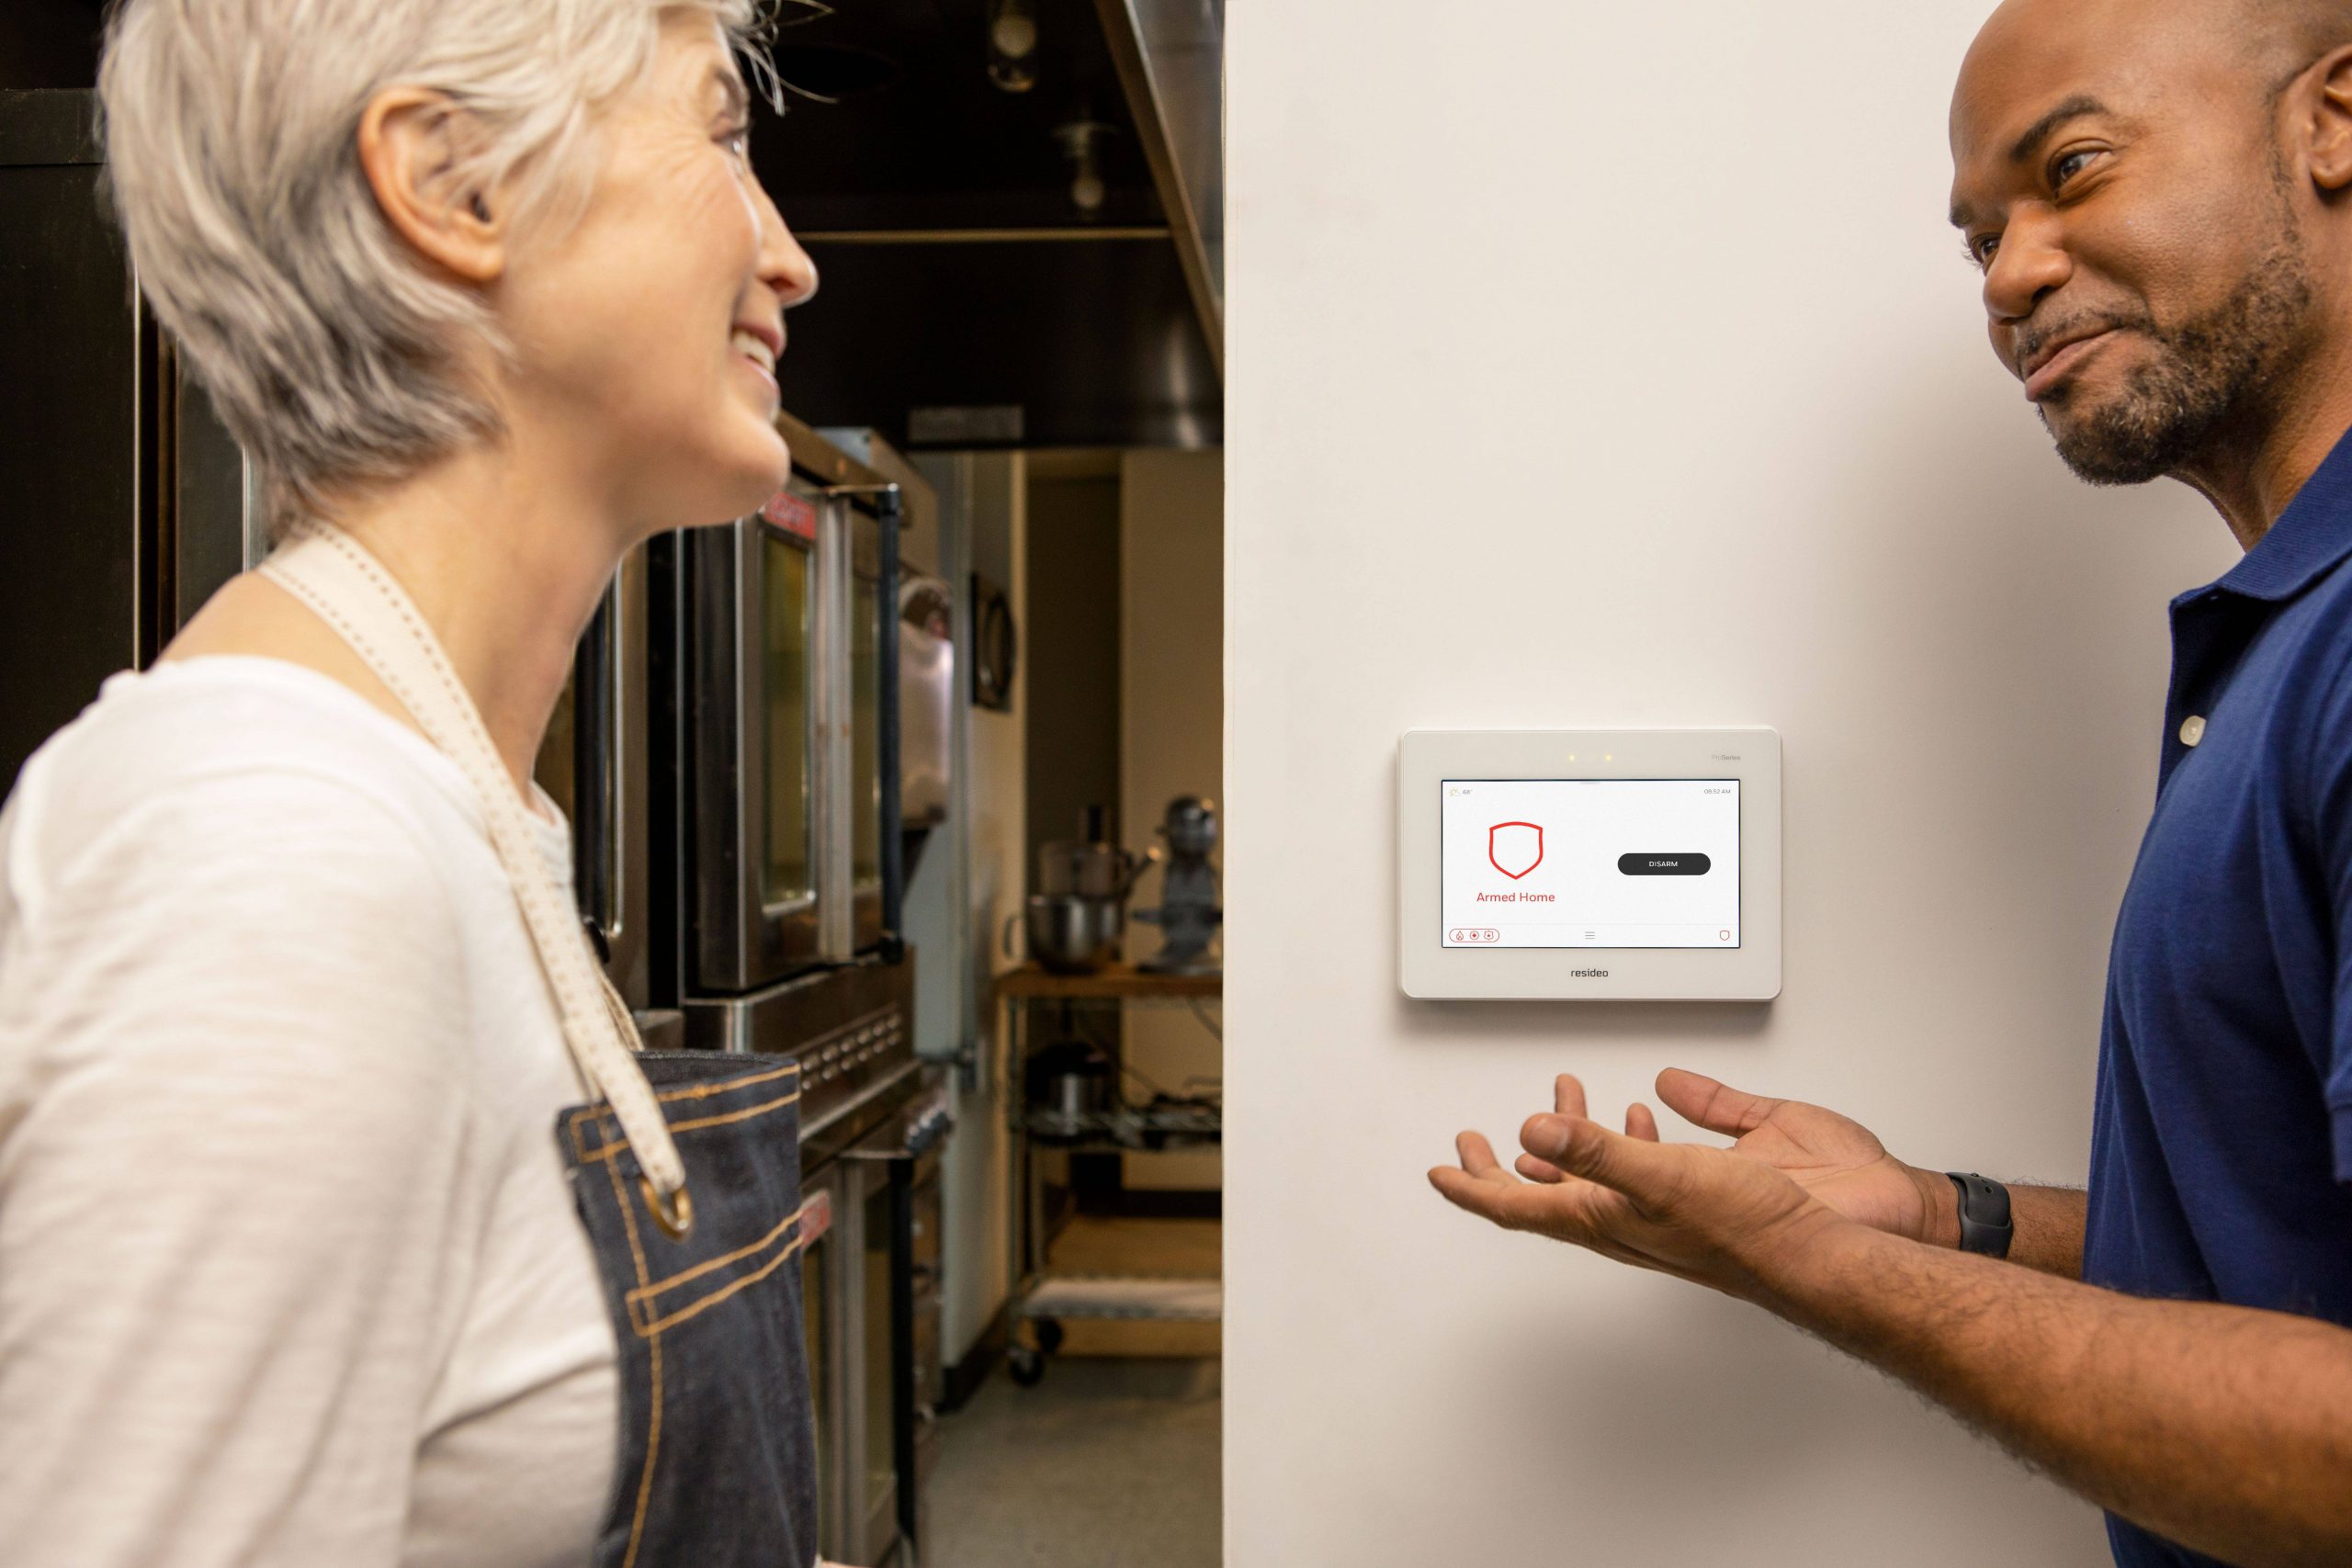 A bakery owner is happy with the business security systems installation from A-Bell Alarms